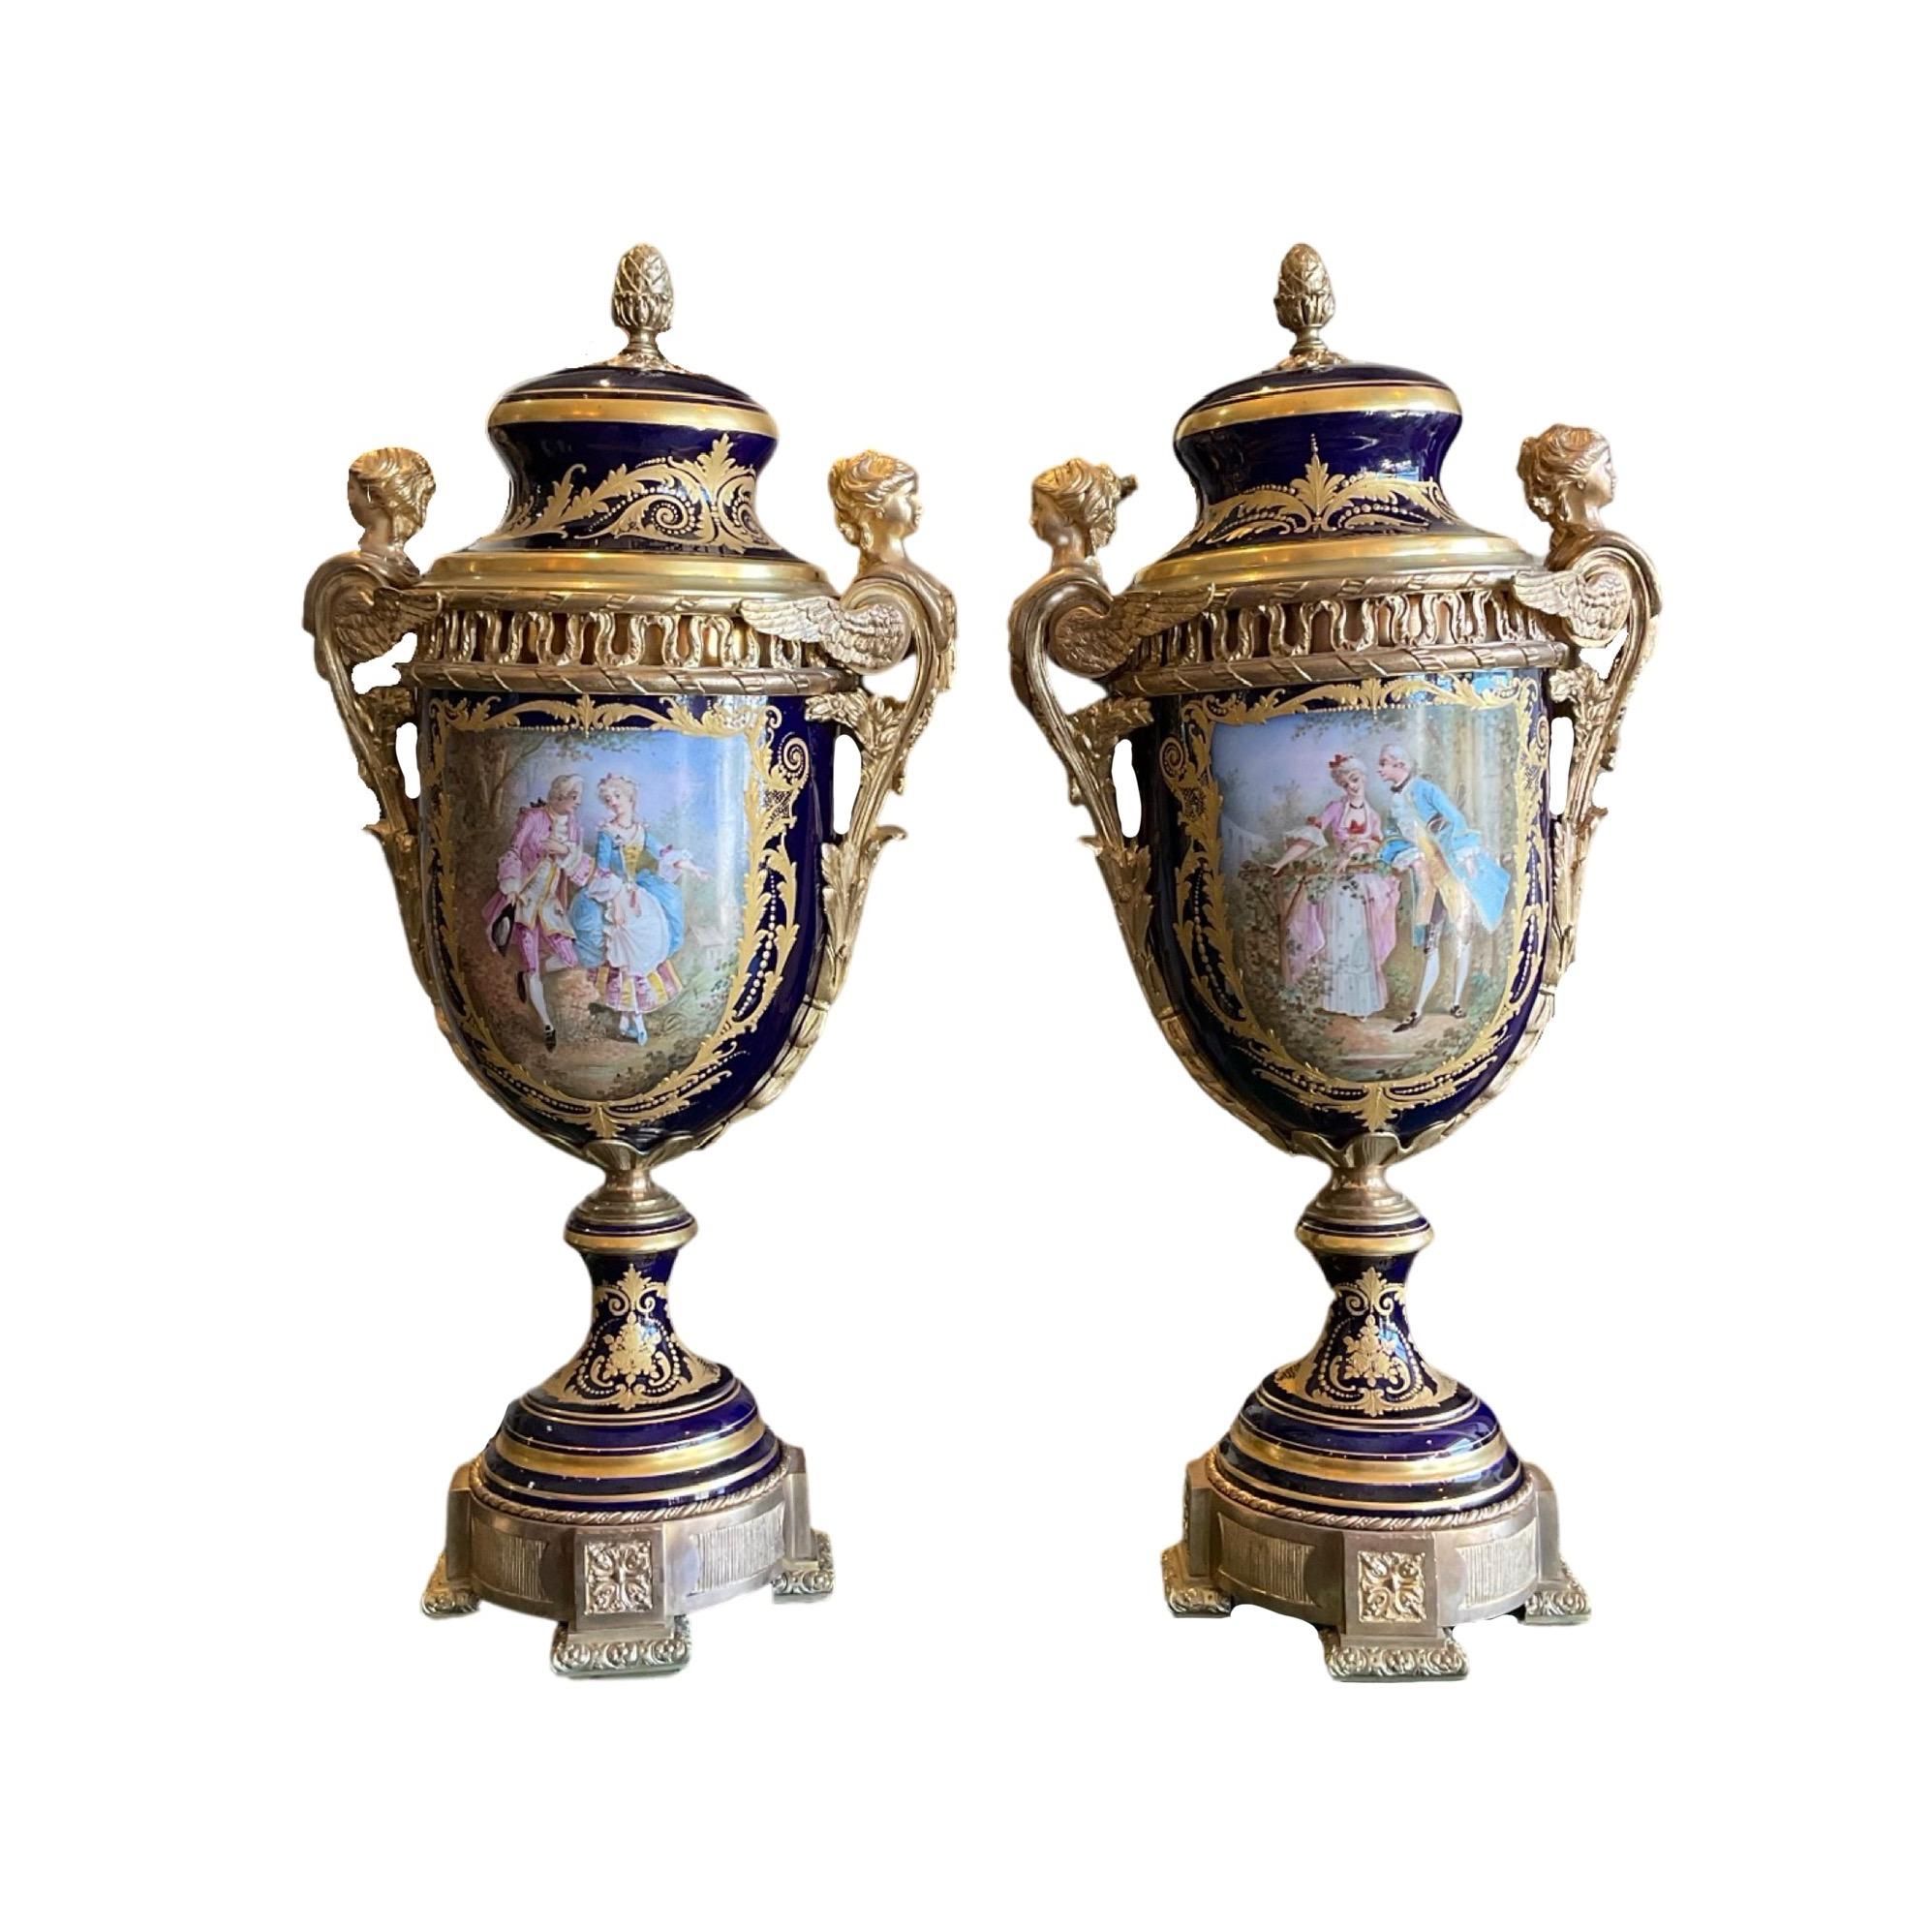 This exquisite pair of 19th-century European Sevres Porcelain Urns are beauty and sophistication personified. Tall blue ceramic vase mounted on a moulded metal stand with metal handles and top of the lid. Handcrafted in Europe with the finest